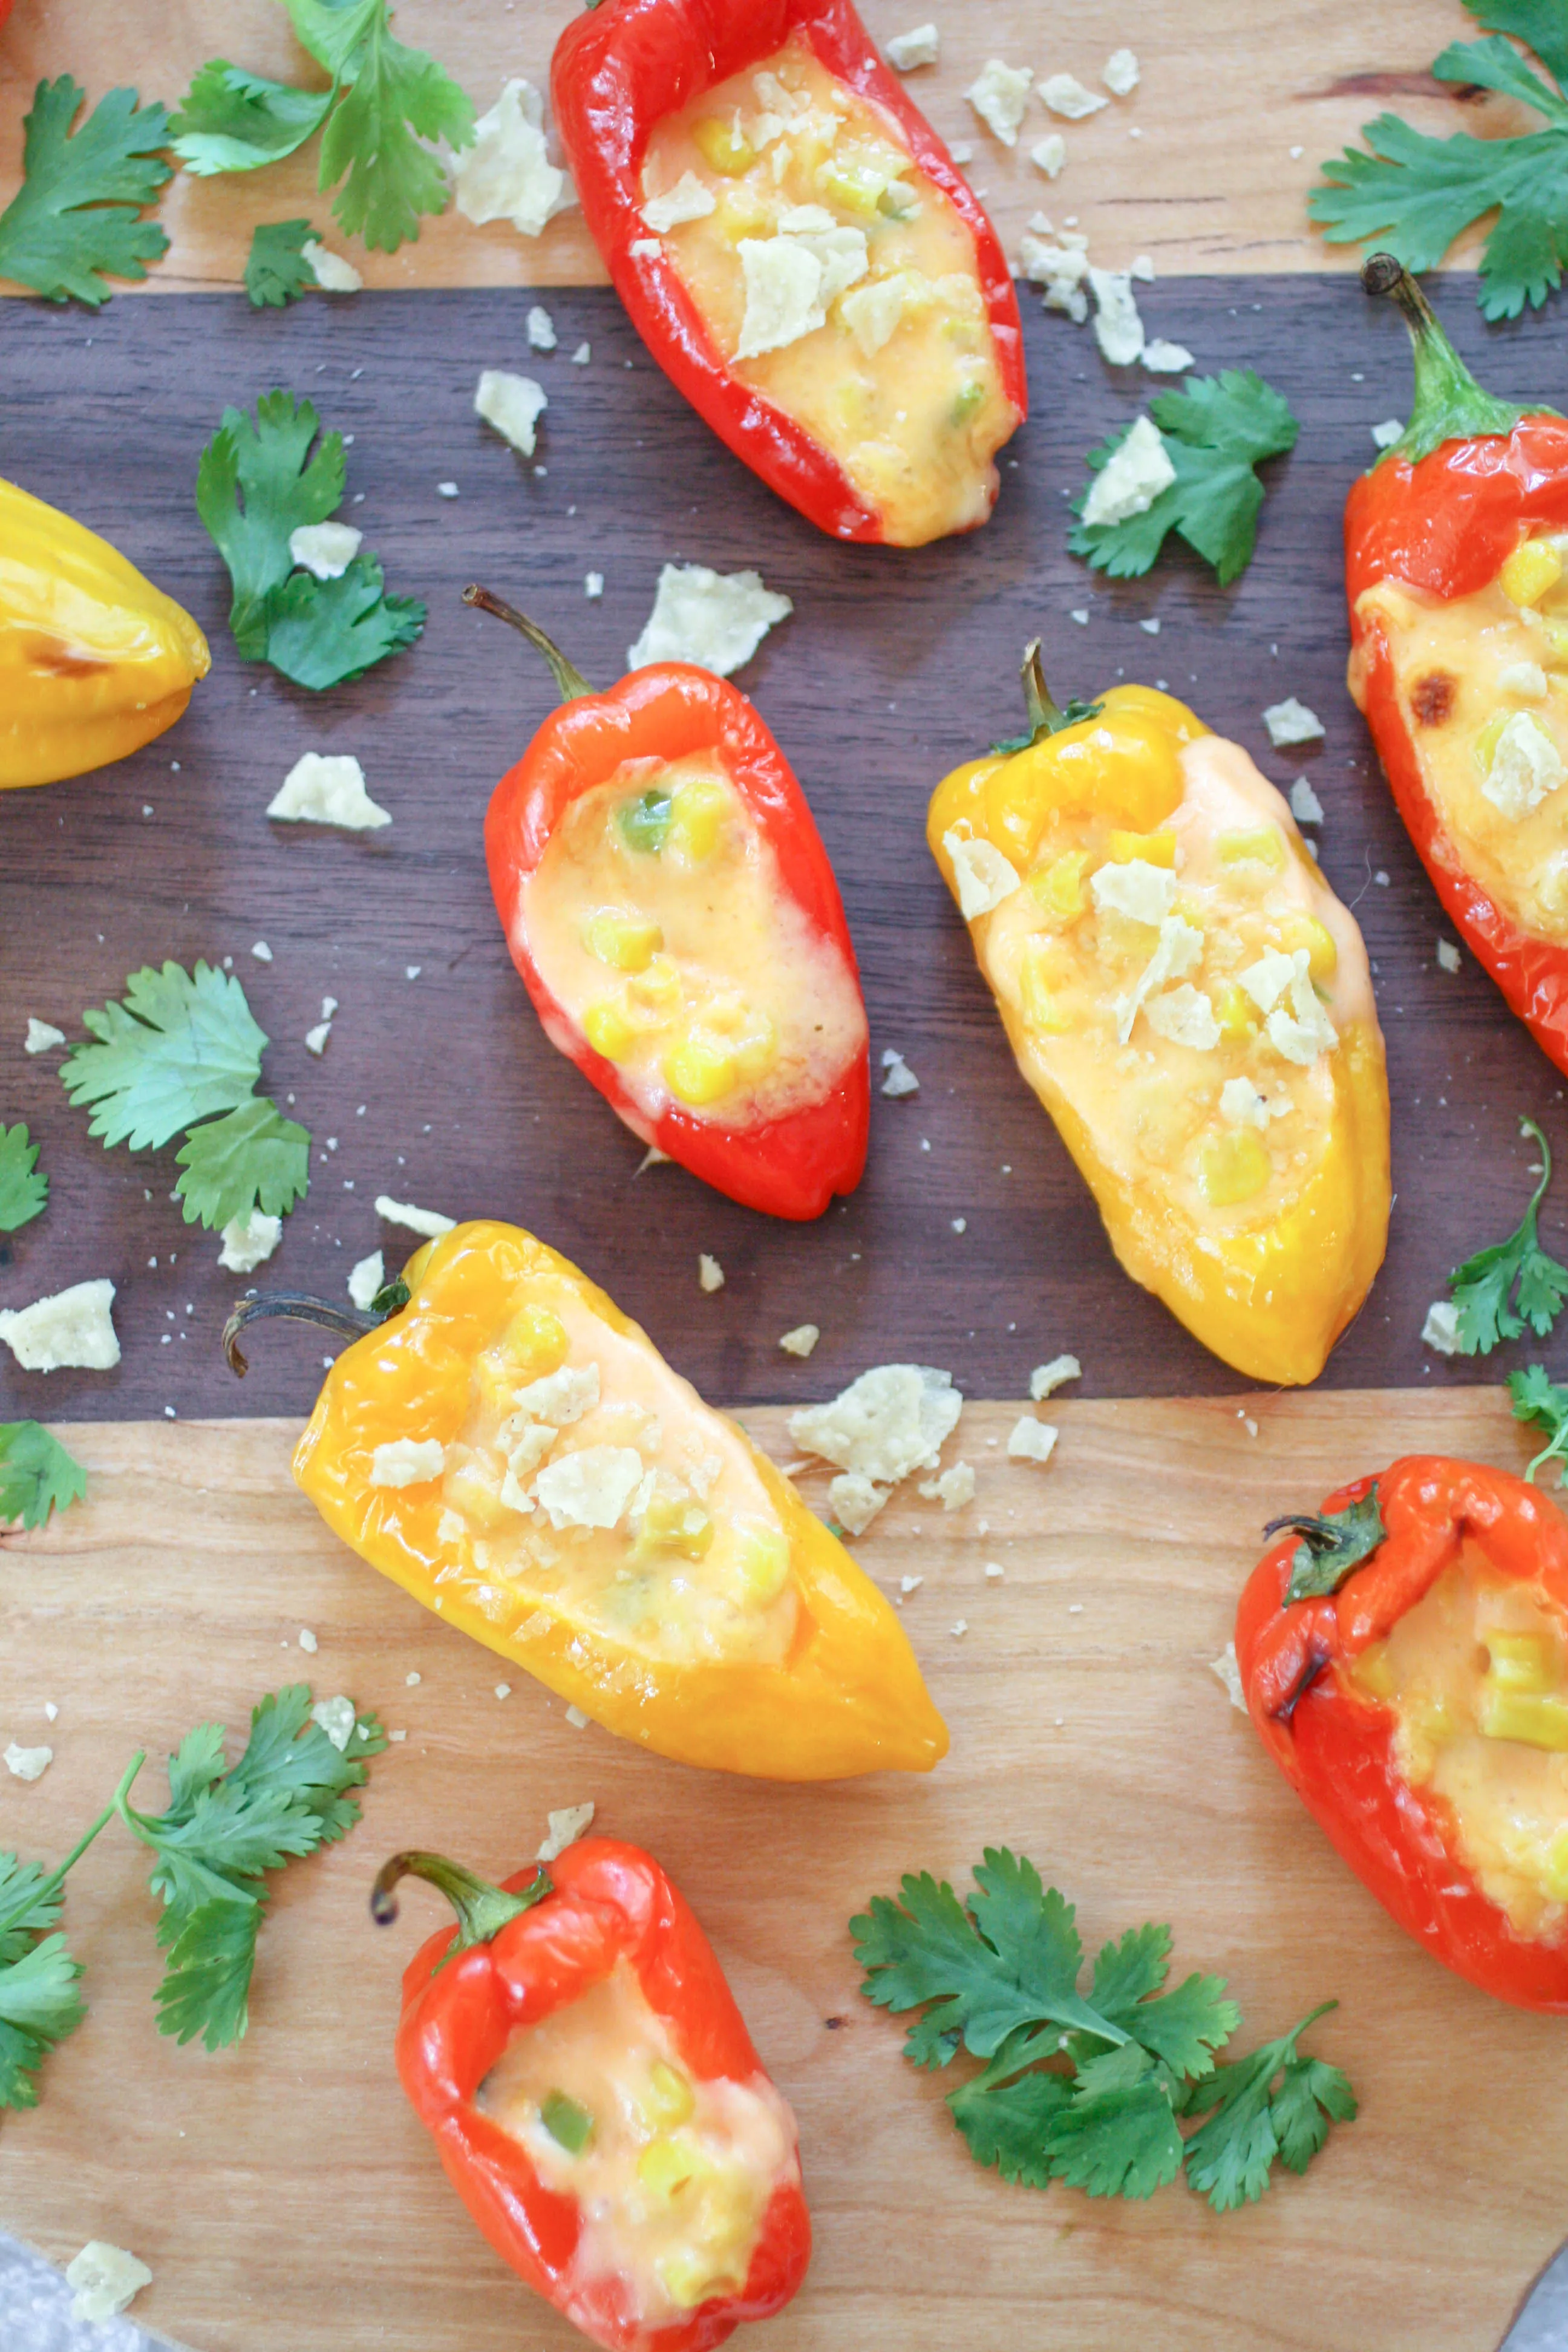 Cheesy Jalapeño & Corn Stuffed Sweet Pepper Poppers are colorful and delicious for your next appetizer! Cheesy Jalapeño & Corn Stuffed Sweet Pepper Poppers are easy to make for any gathering!